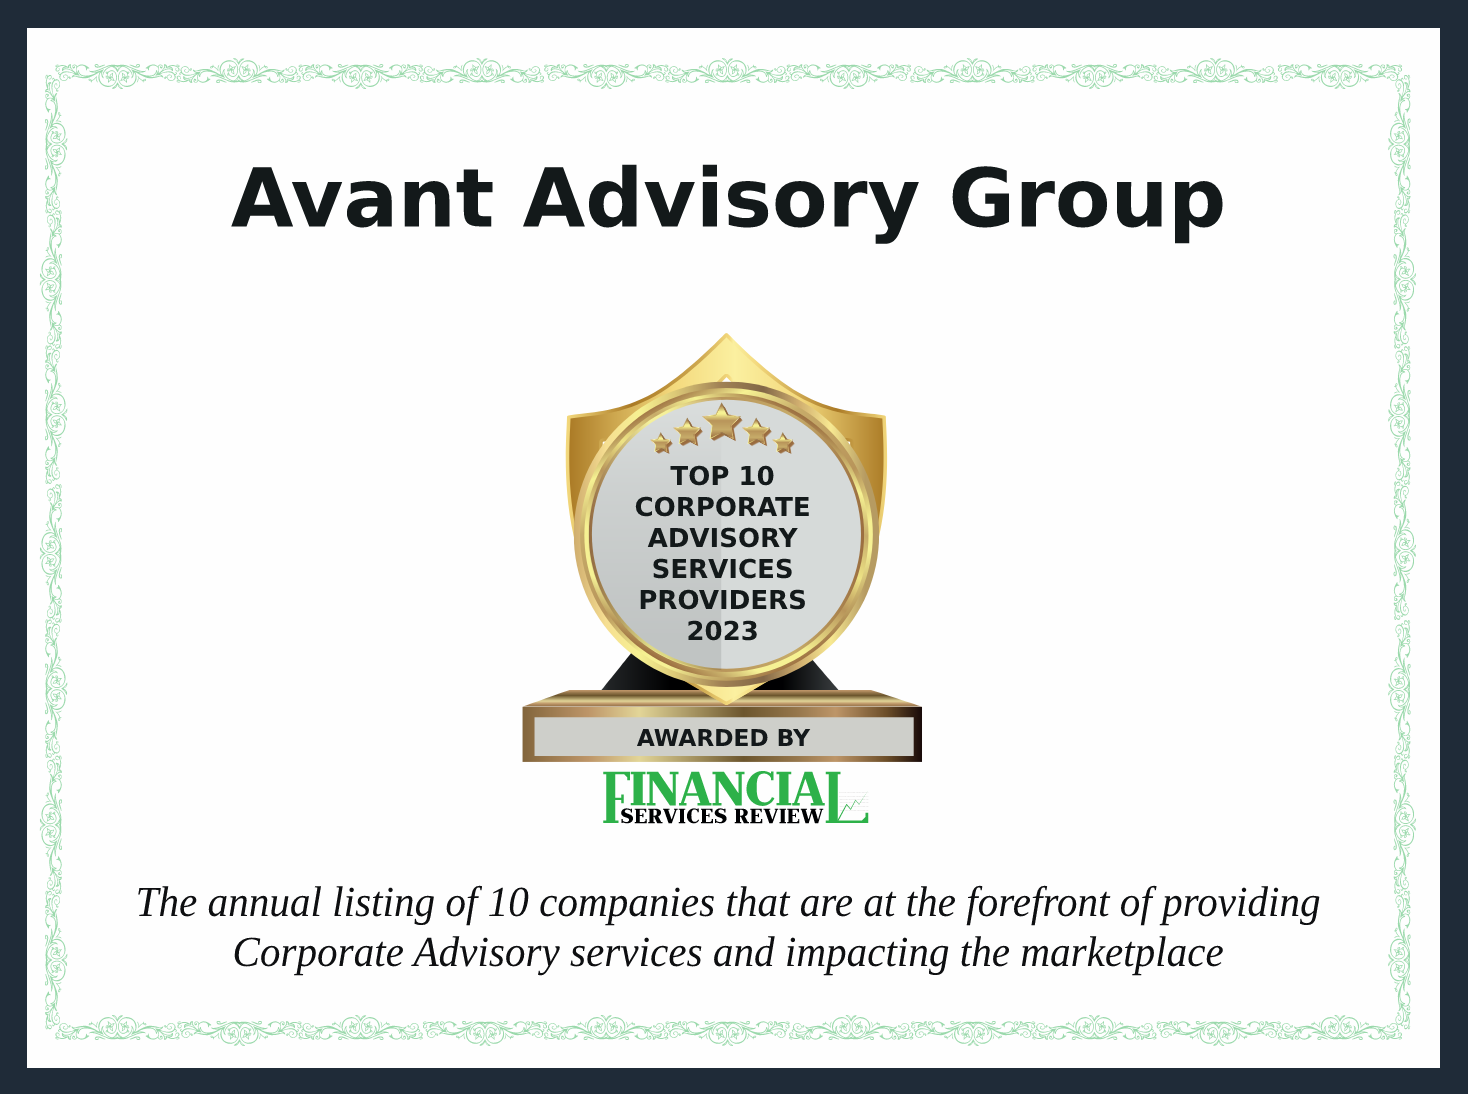 Avant® Advisory Group Featured as a 2023 Top 10 Corporate Advisory Services Firm